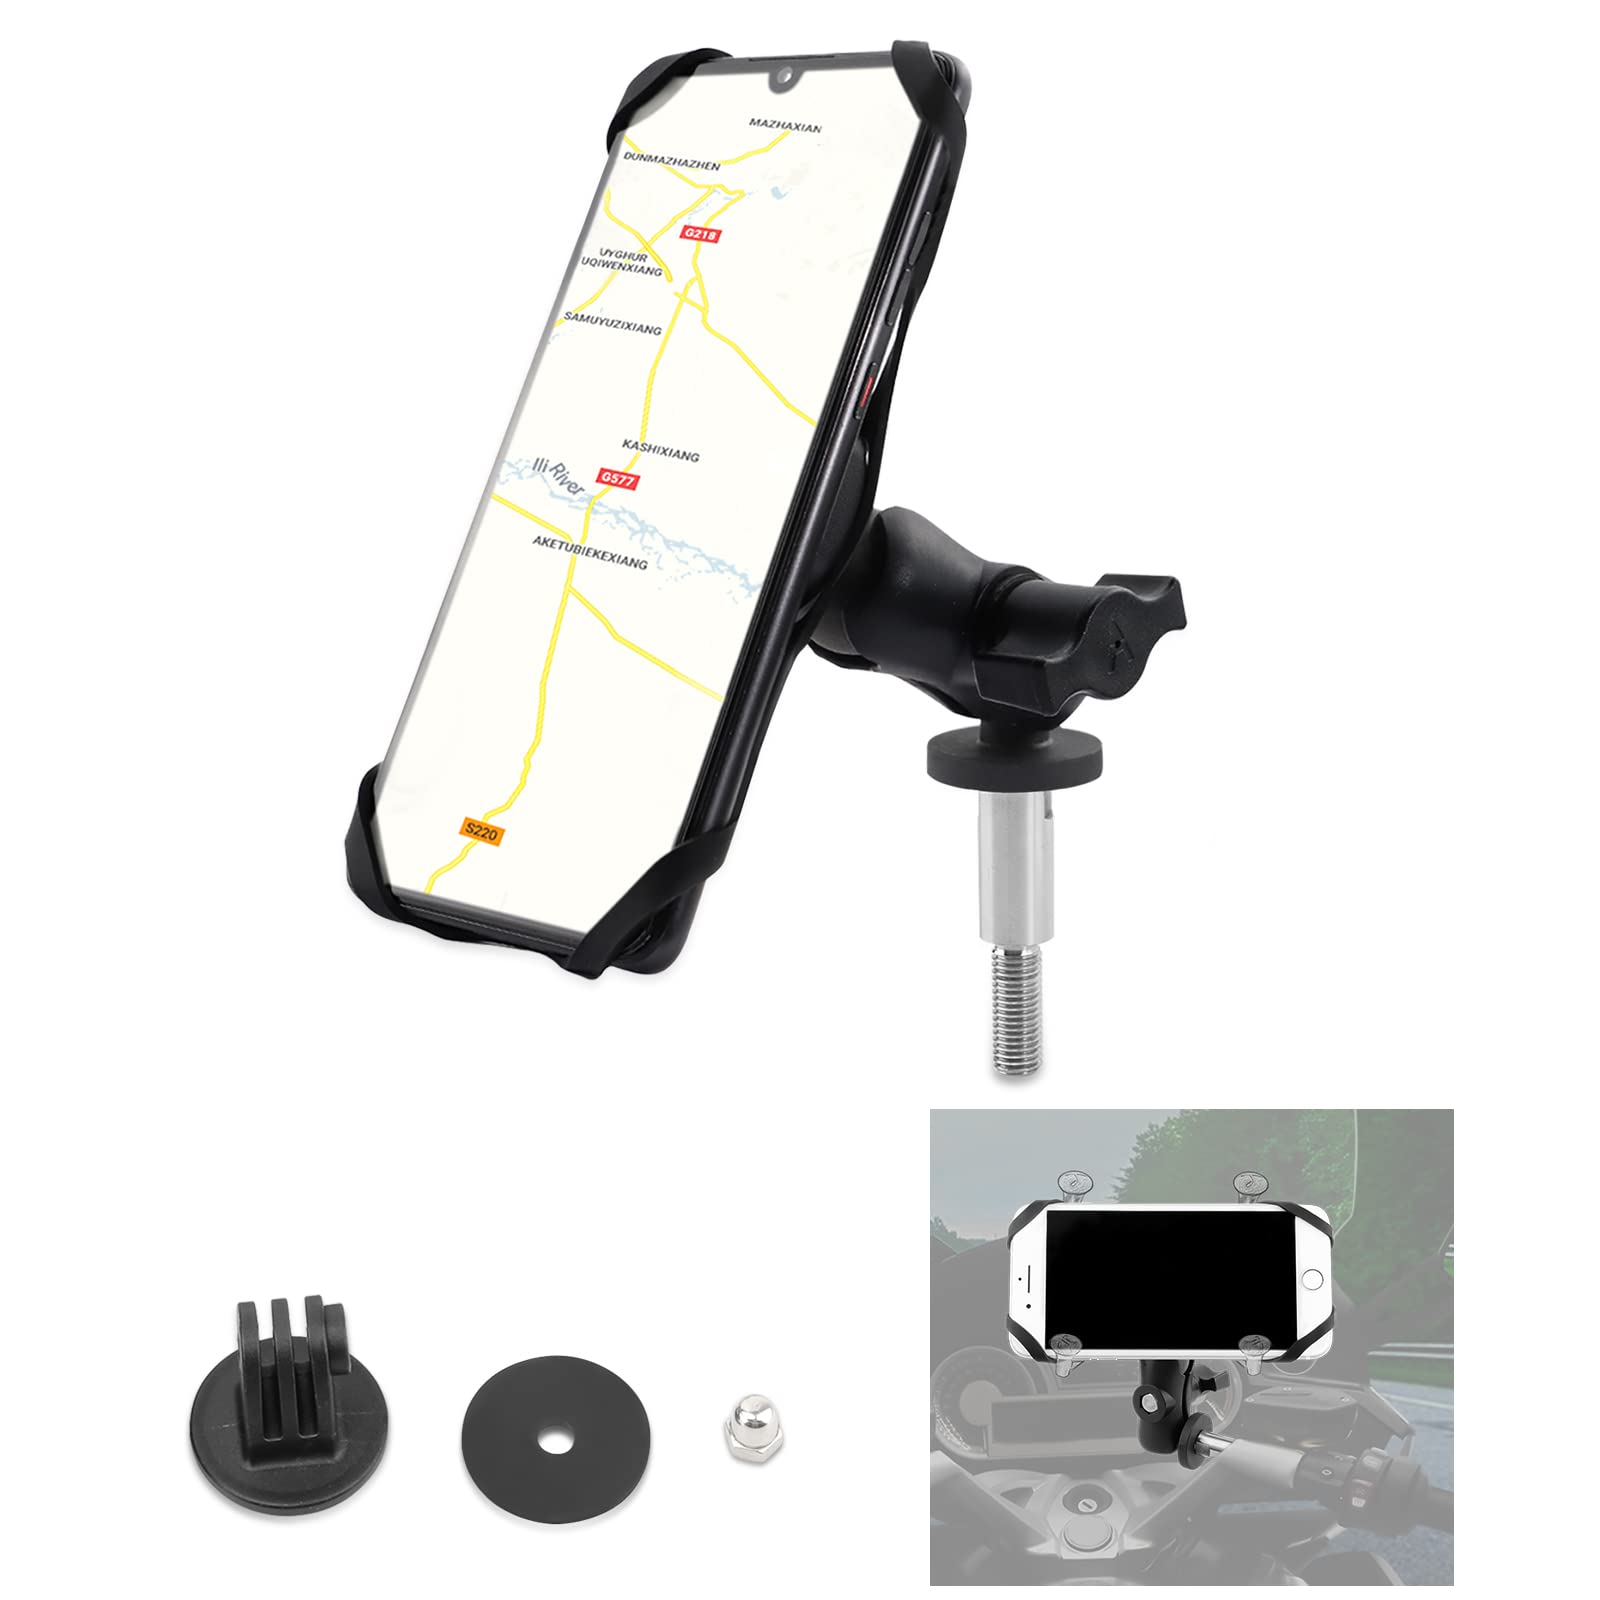 GUAIMI Motorcycle Phone Mount Action Cam Holder Original Handlebar Attachment Mount for K1600GT K1600GTL R1200RT R1200RT LC R1250RT